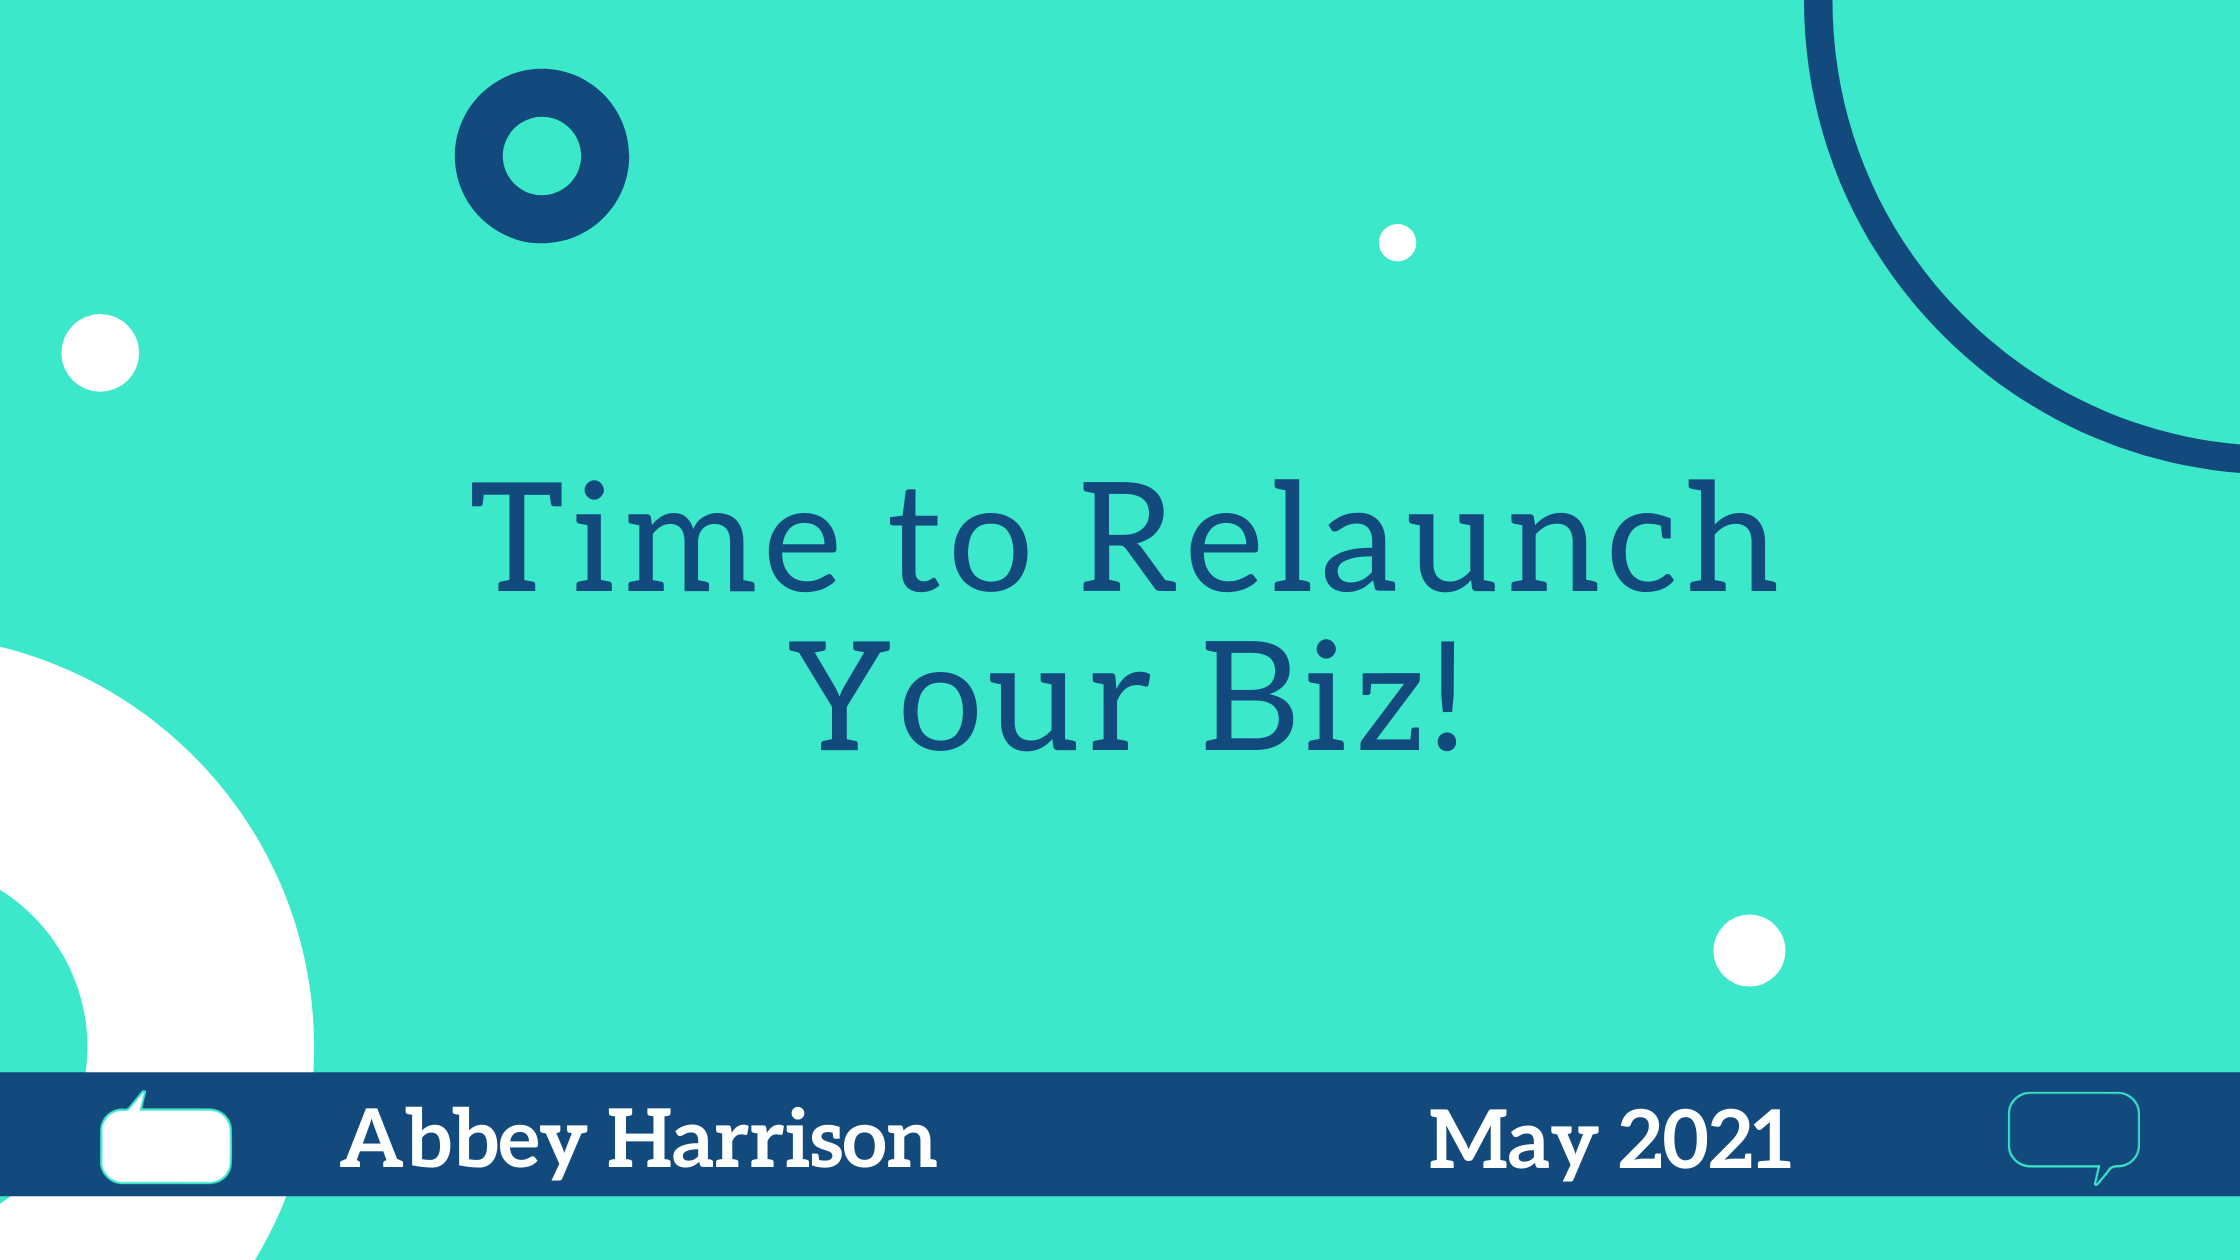 Time to Relaunch Your Biz!